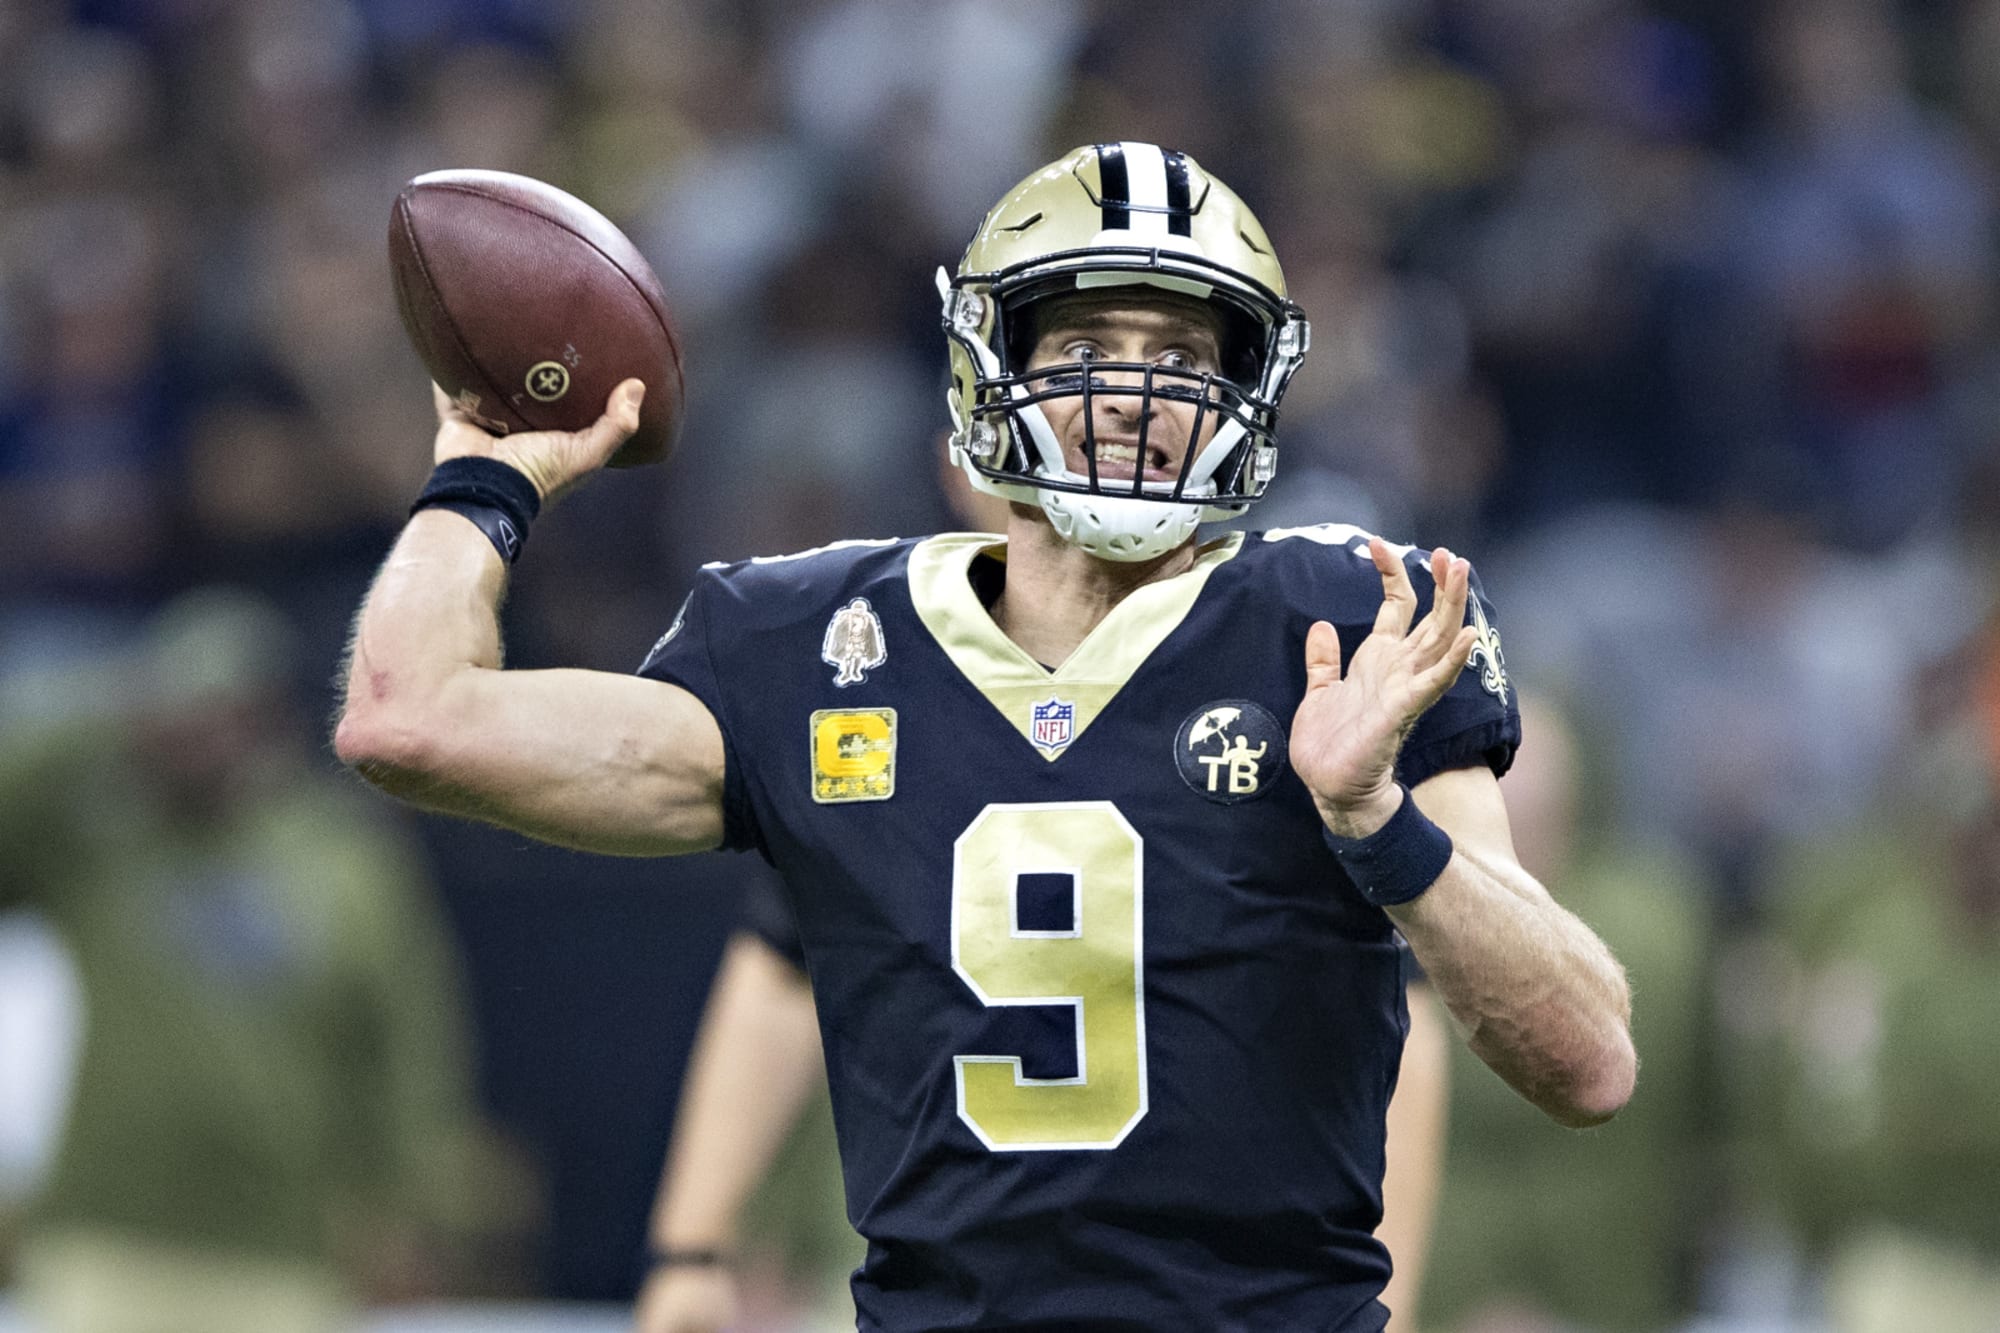 NFL on FOX - WHO DAT! The New Orleans Saints come back to win their 11th  game of the season!